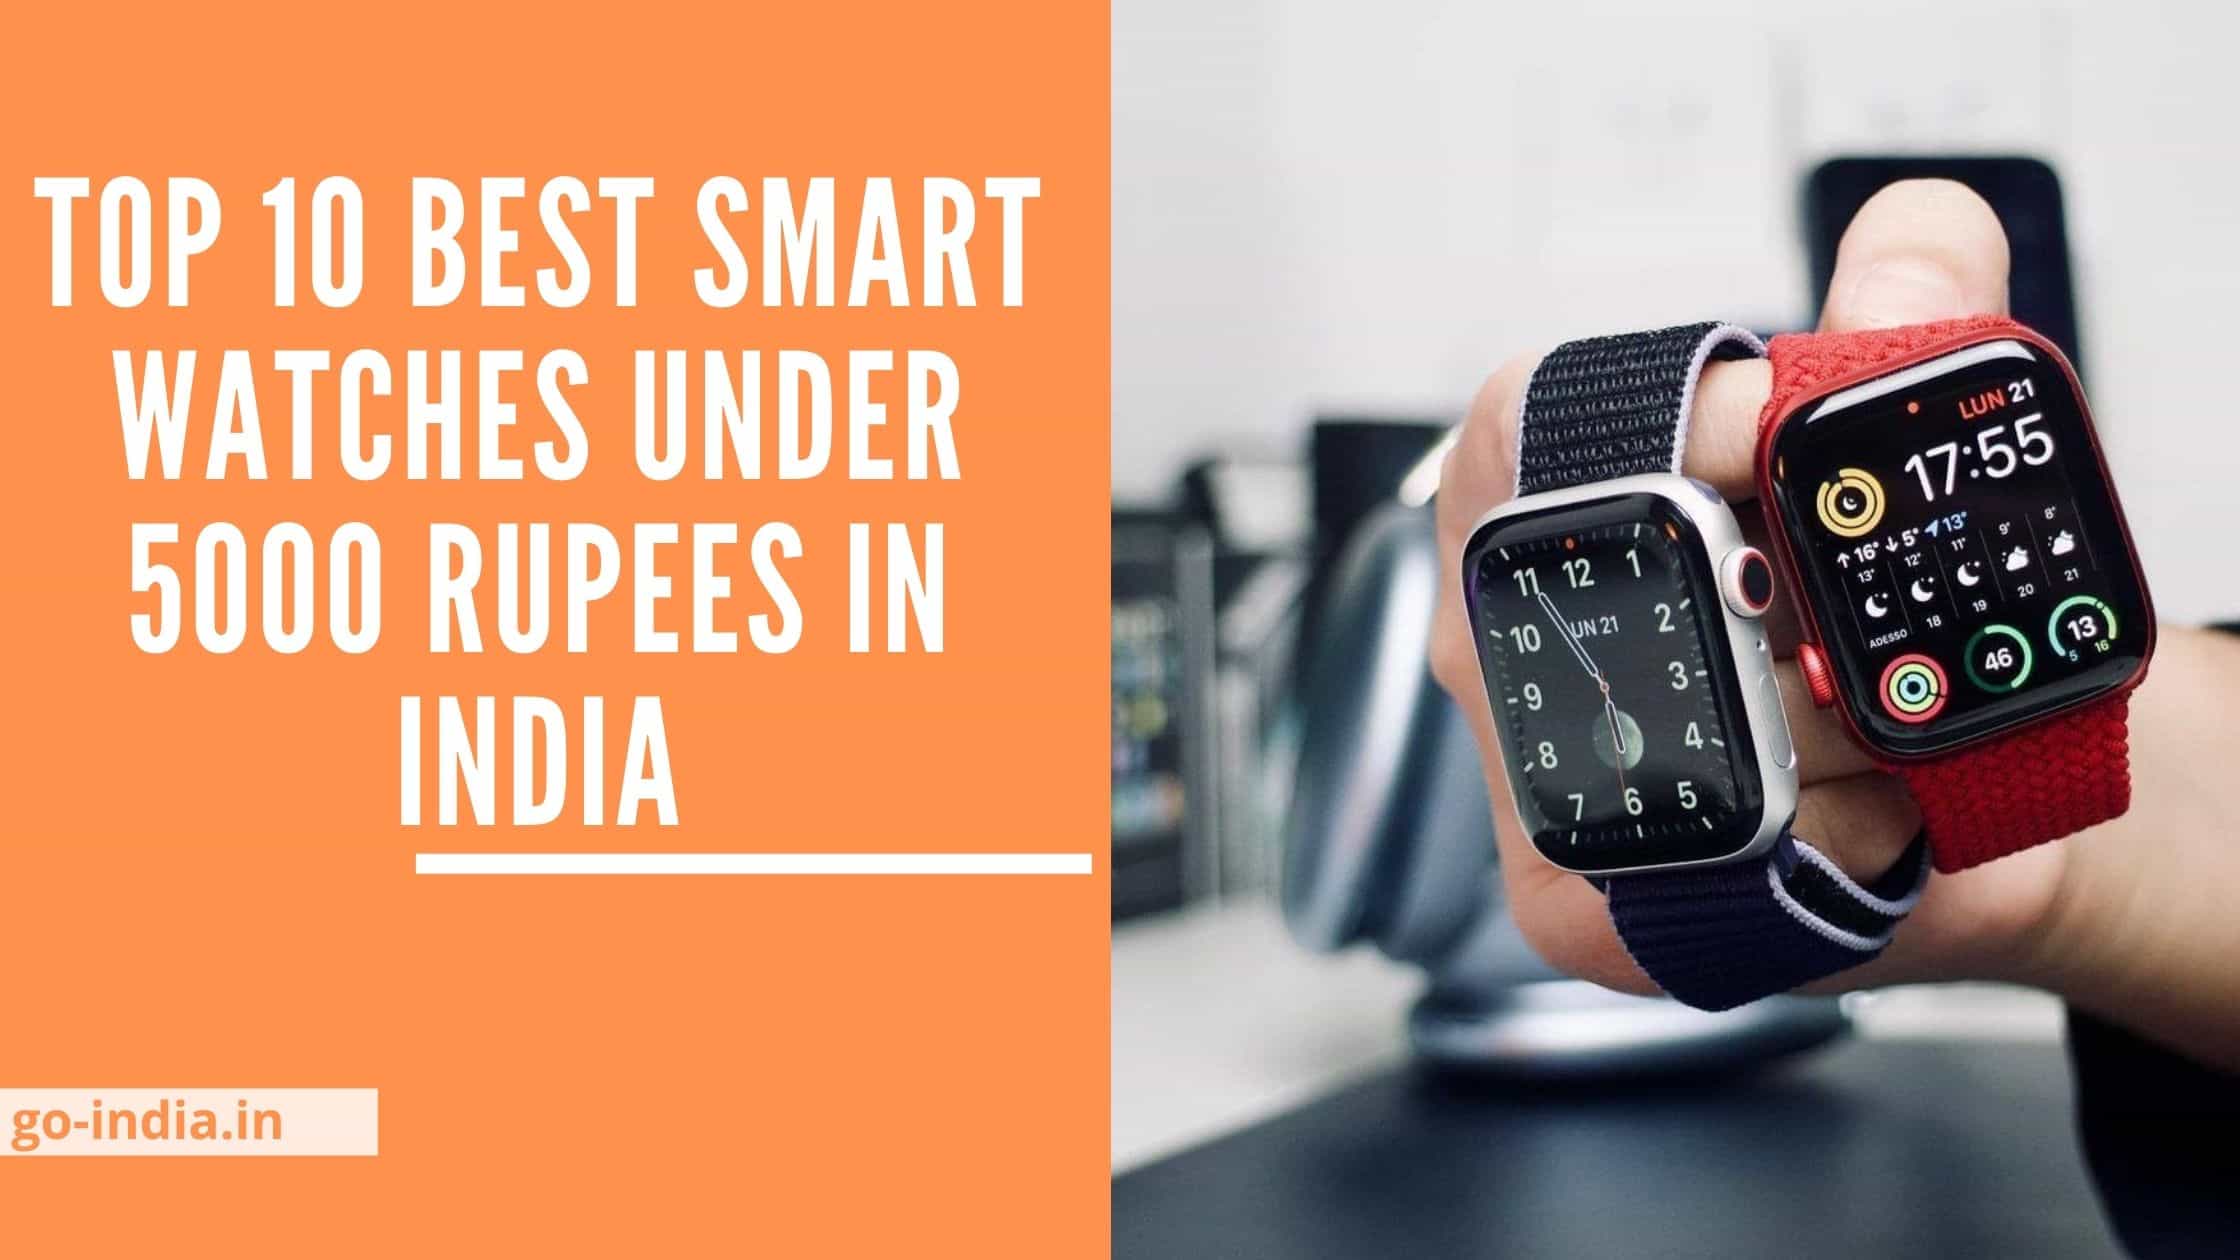 Top 10 Best Smart Watches Under 5000 Rupees in India 2022